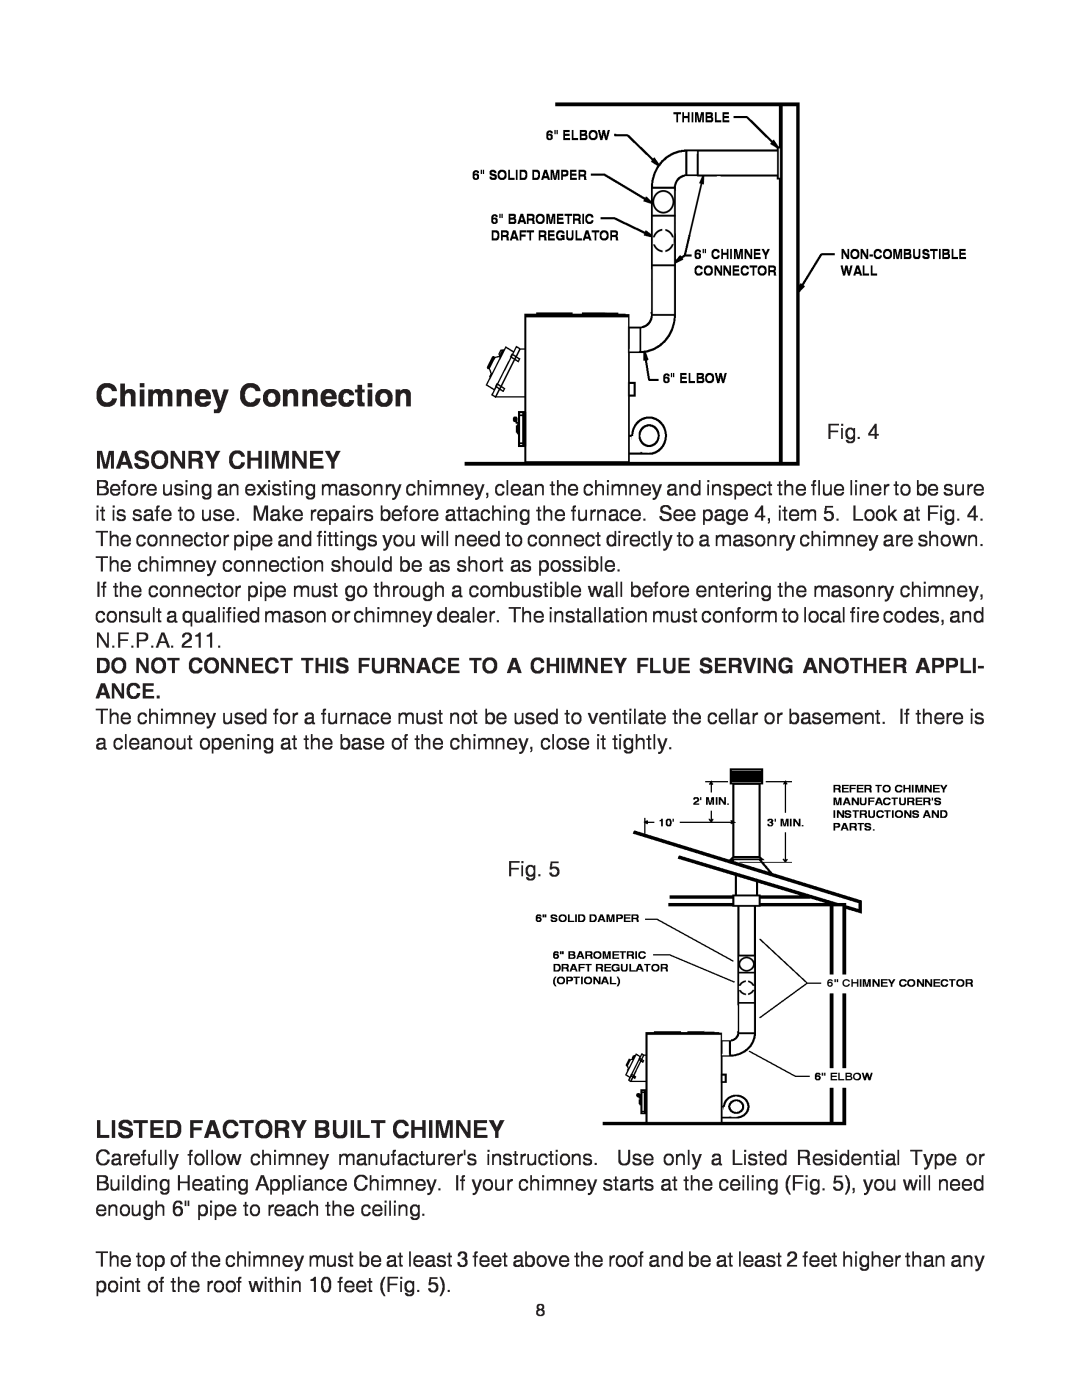 United States Stove 1500 owner manual Chimney Connection, Masonry Chimney, Listed Factory Built Chimney 